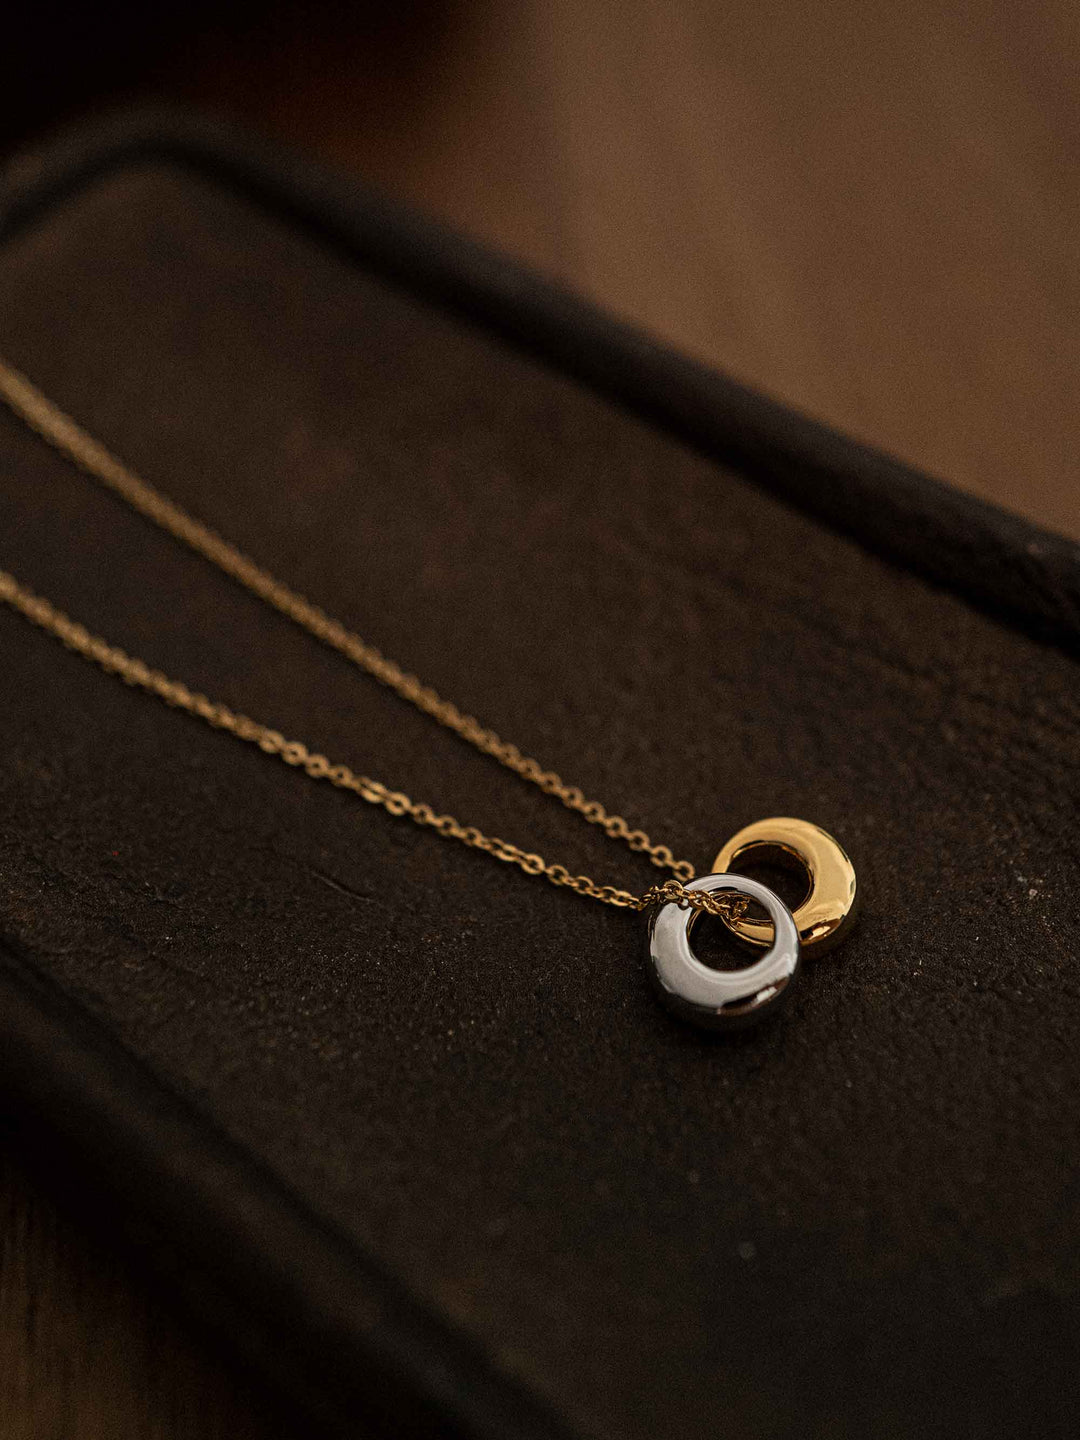 A gold necklace with gold and silver circles